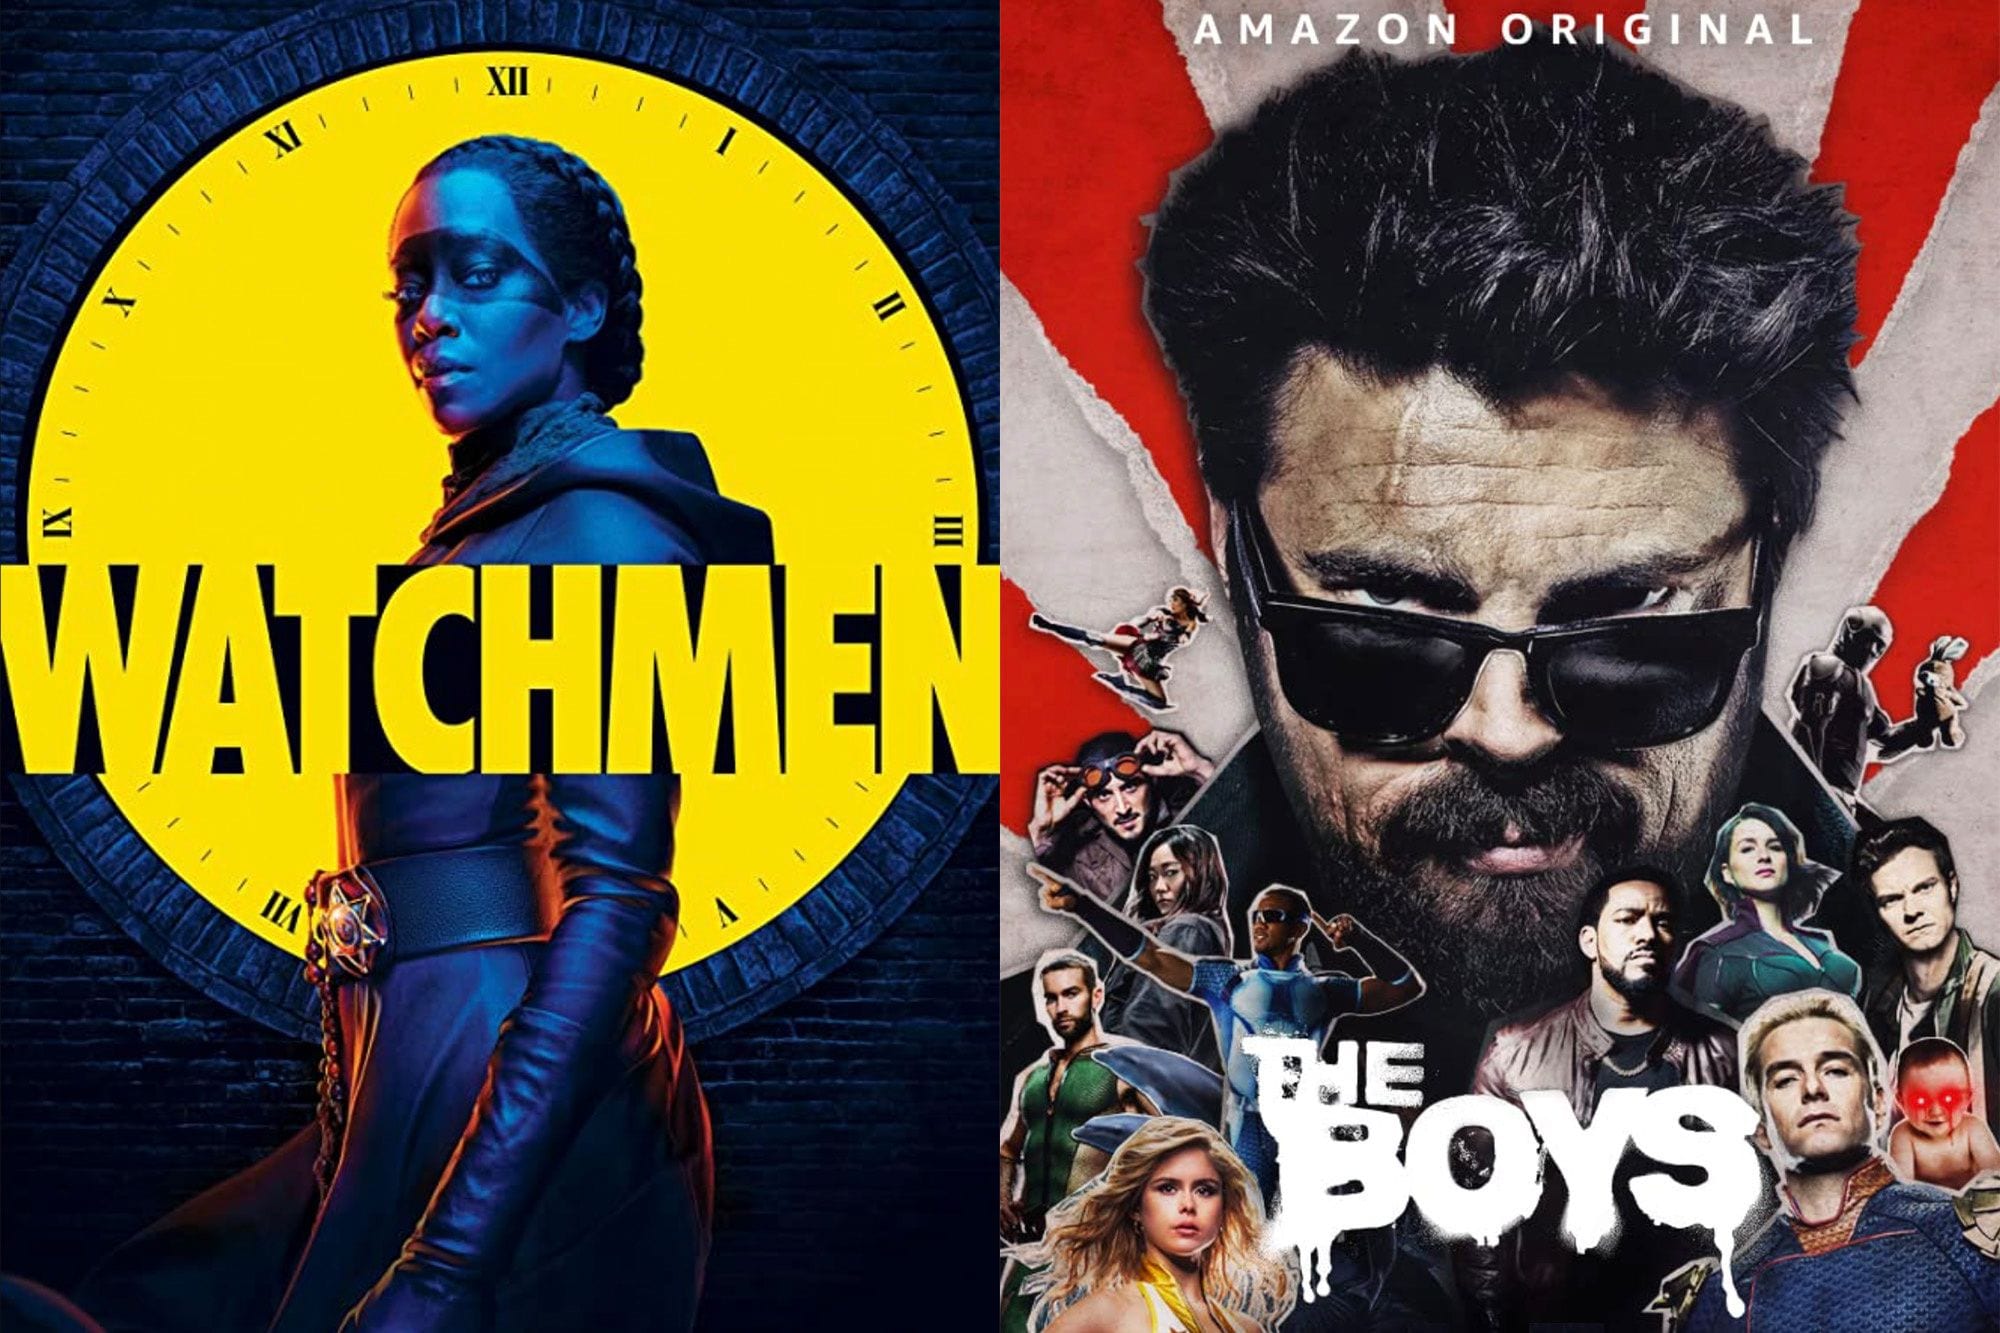 How ‘Watchmen’ and ‘The Boys’ Deconstruct American Fascism